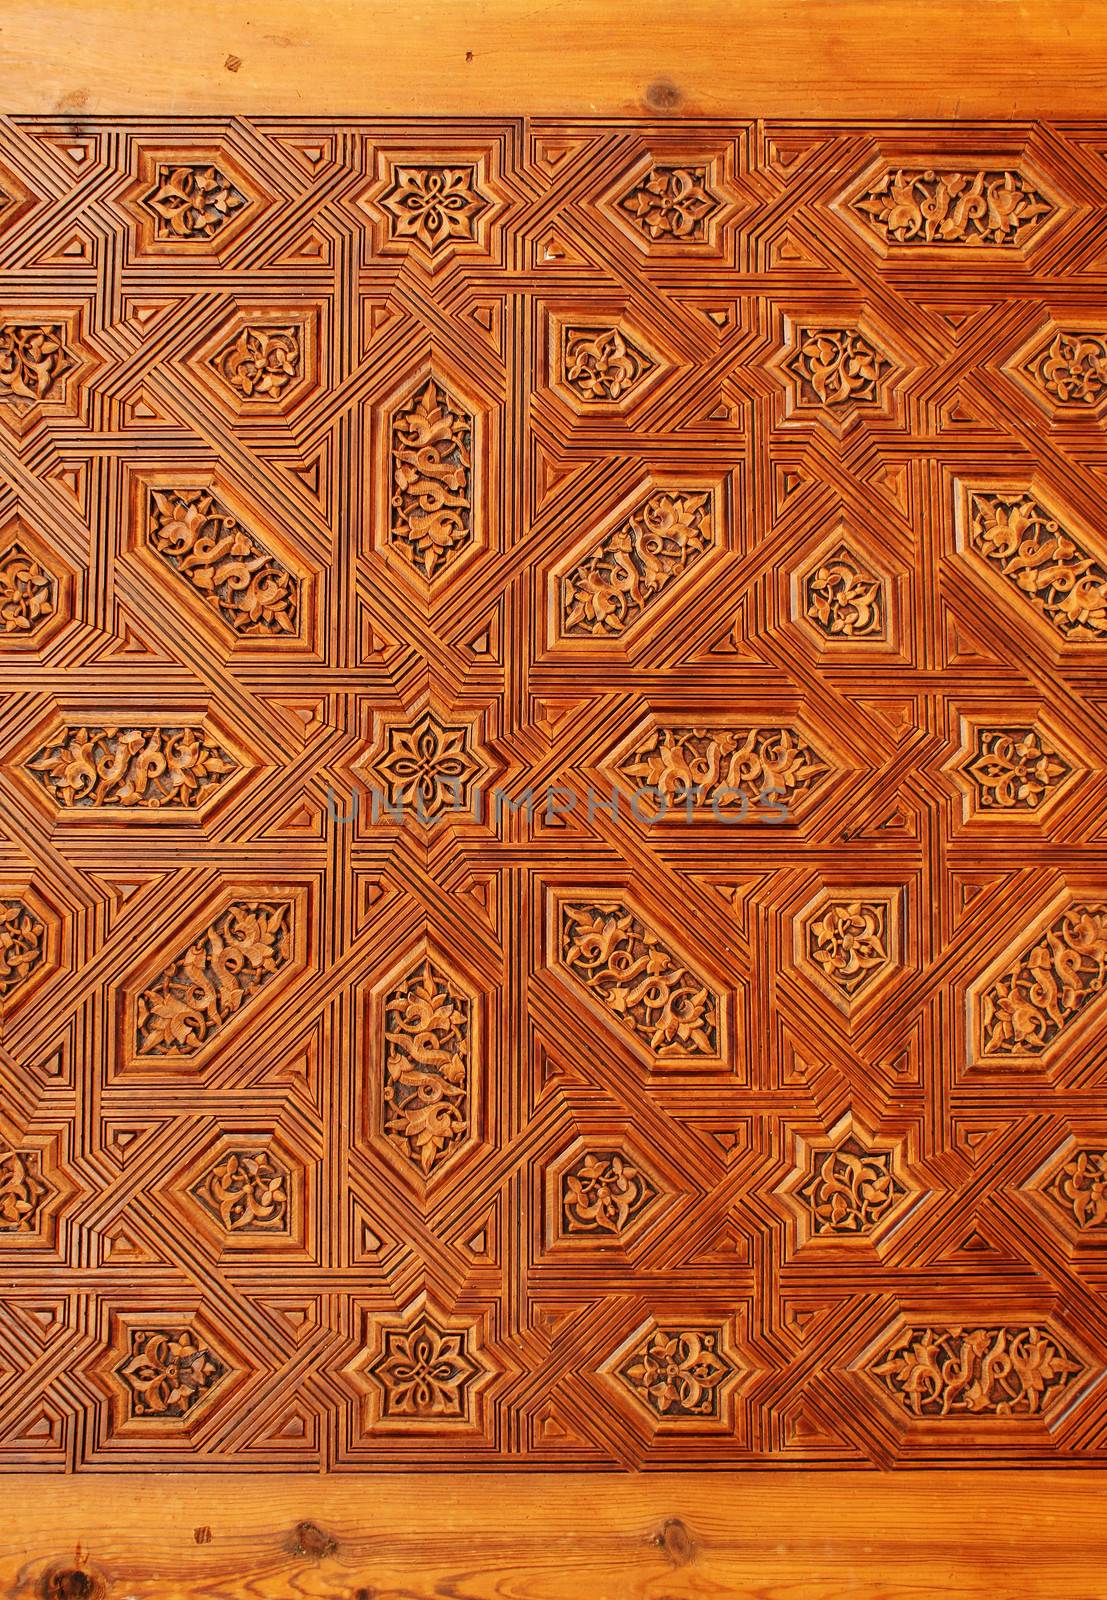 Antique carved wooden ornament in Alhambra by frenta